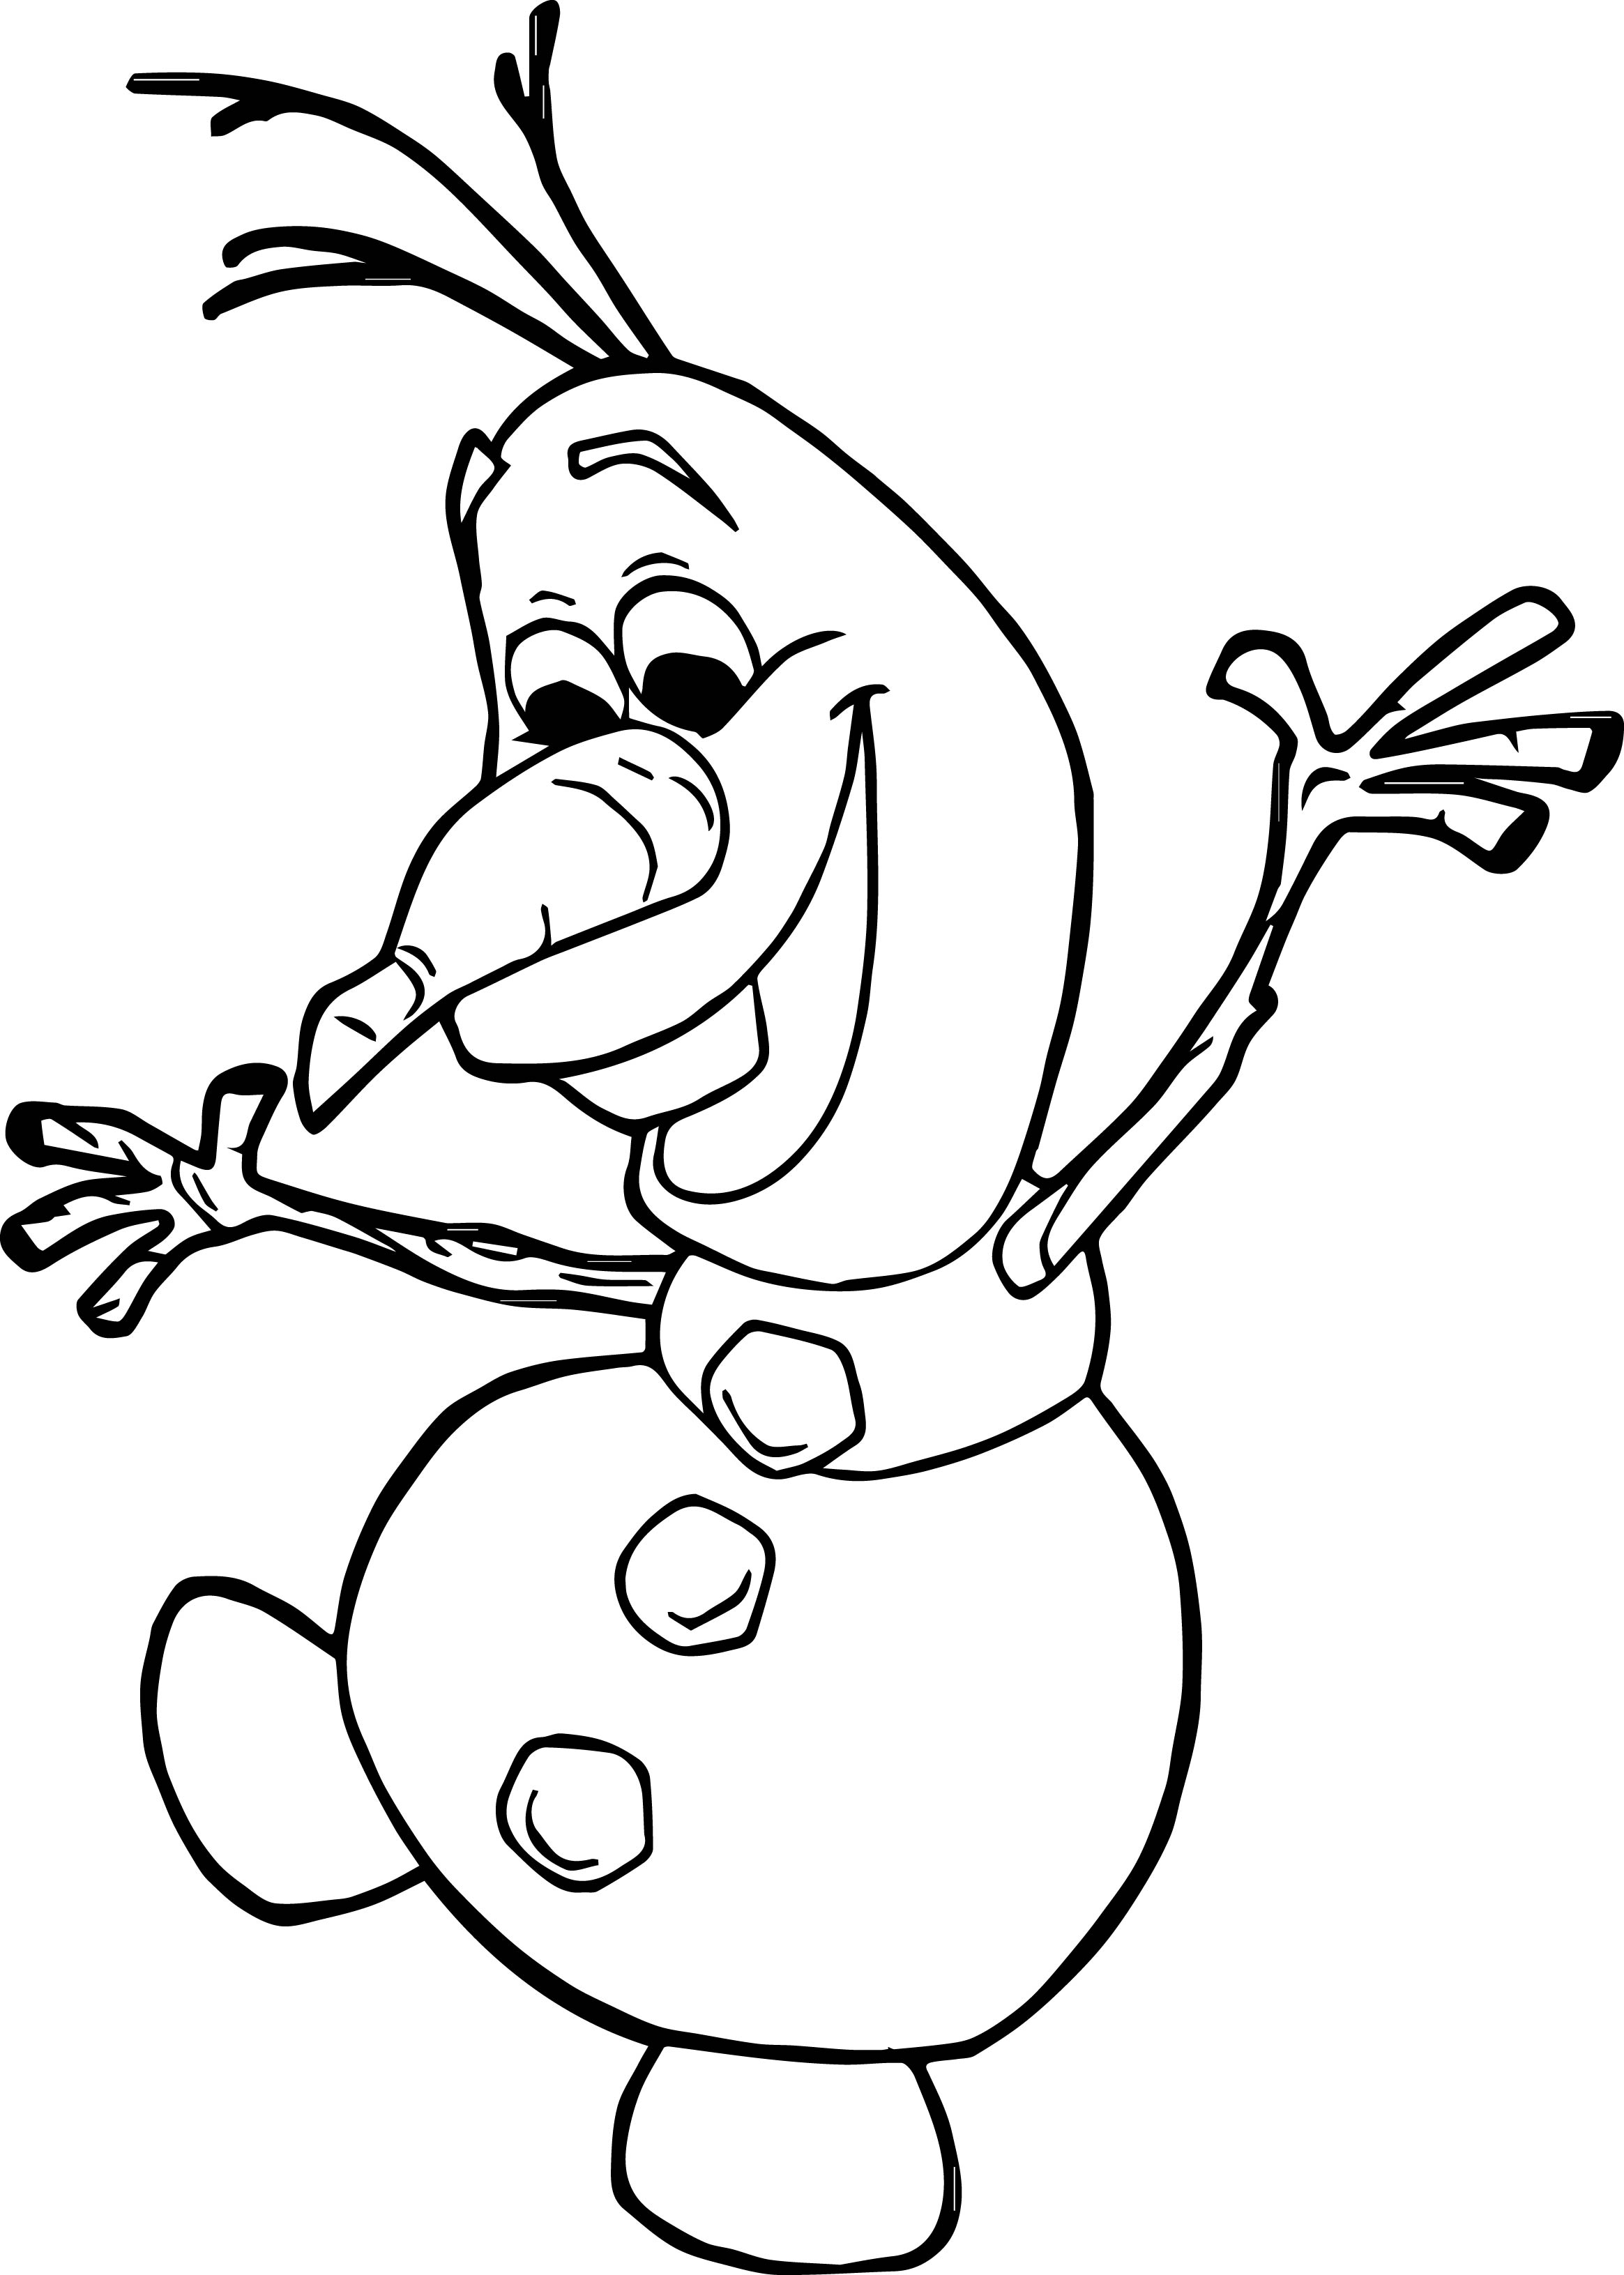 Olaf Summer Coloring Sheets Coloring Pages